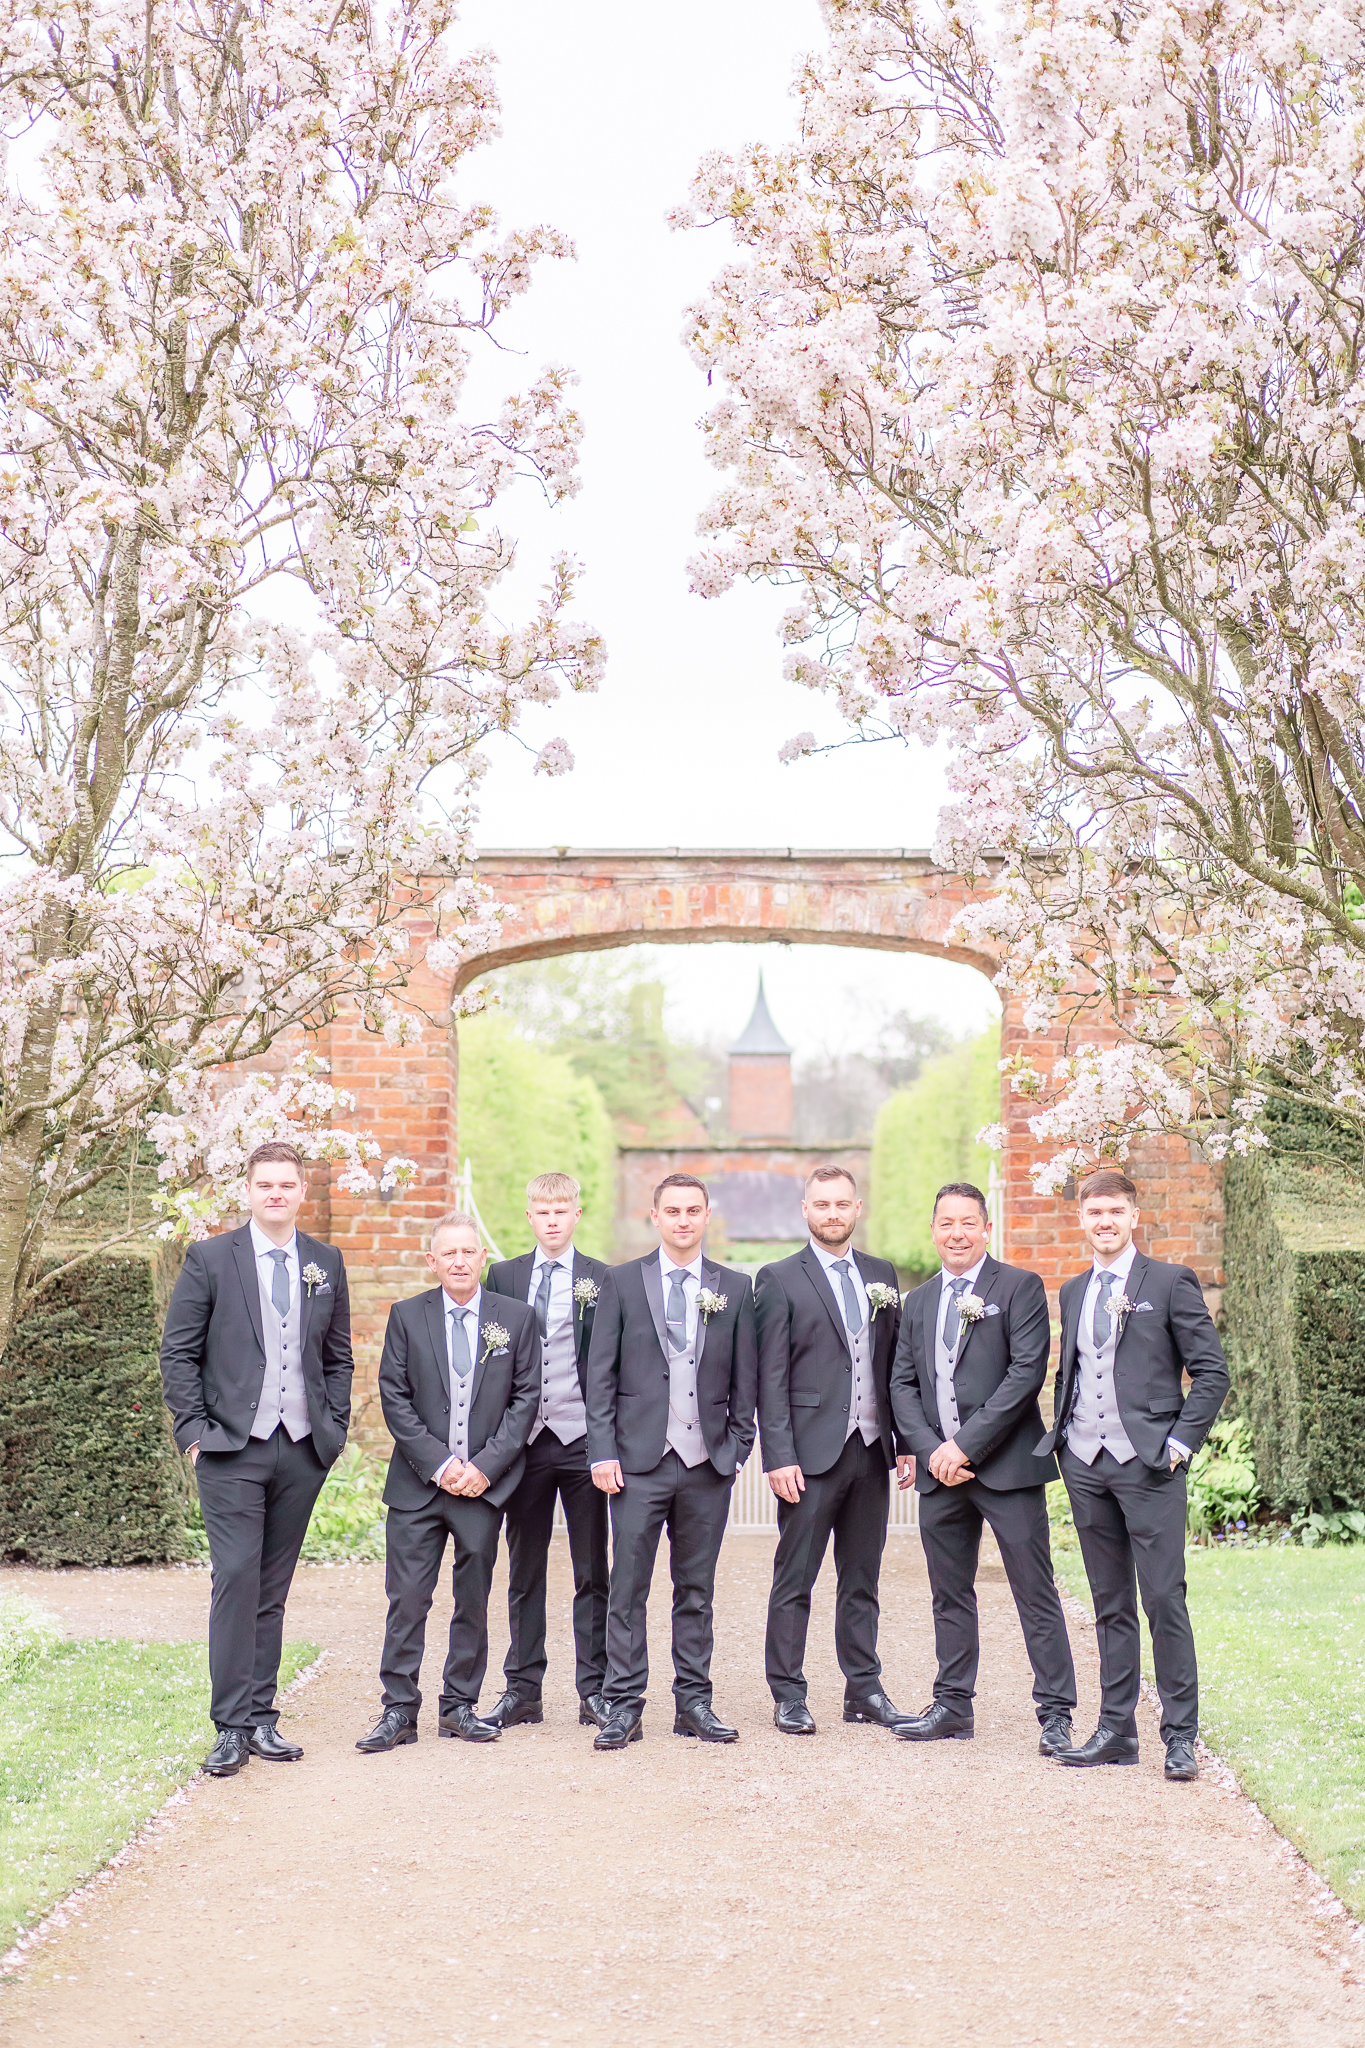 Group photo of Spencer and his six groomsmen at Combermere Abbey in Cheshire